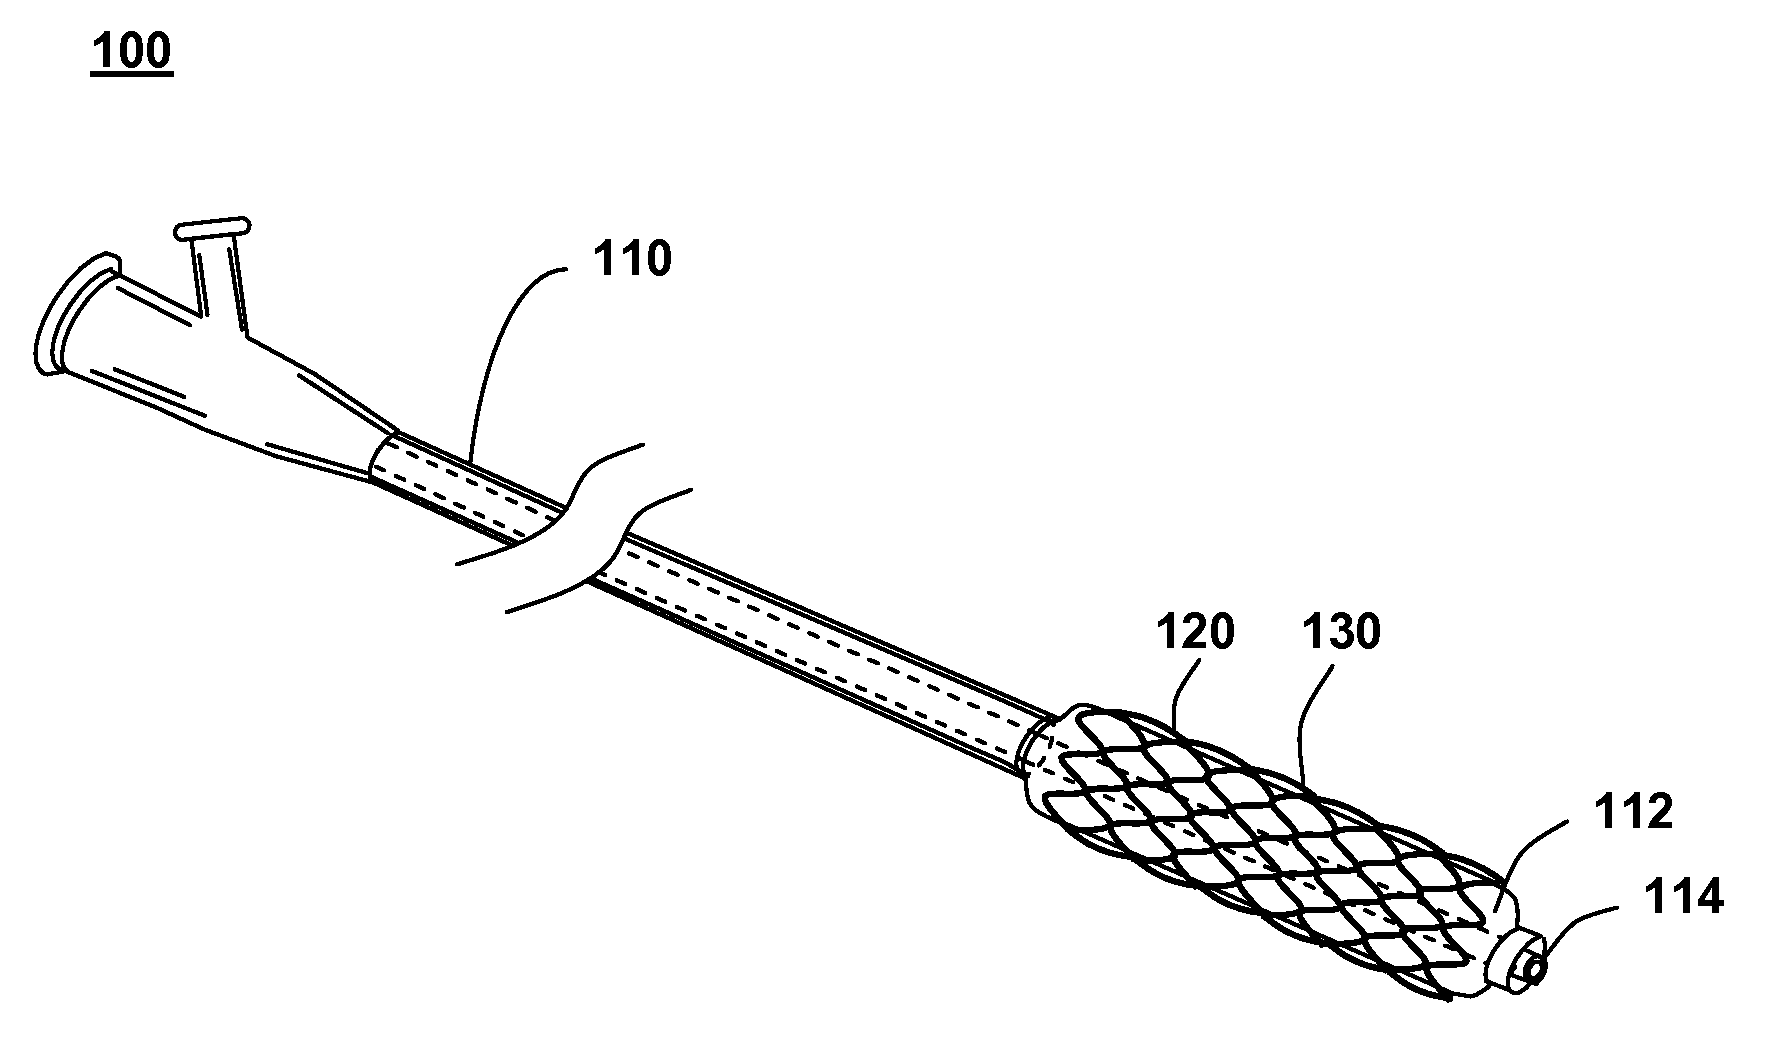 Controlled Porosity Stent